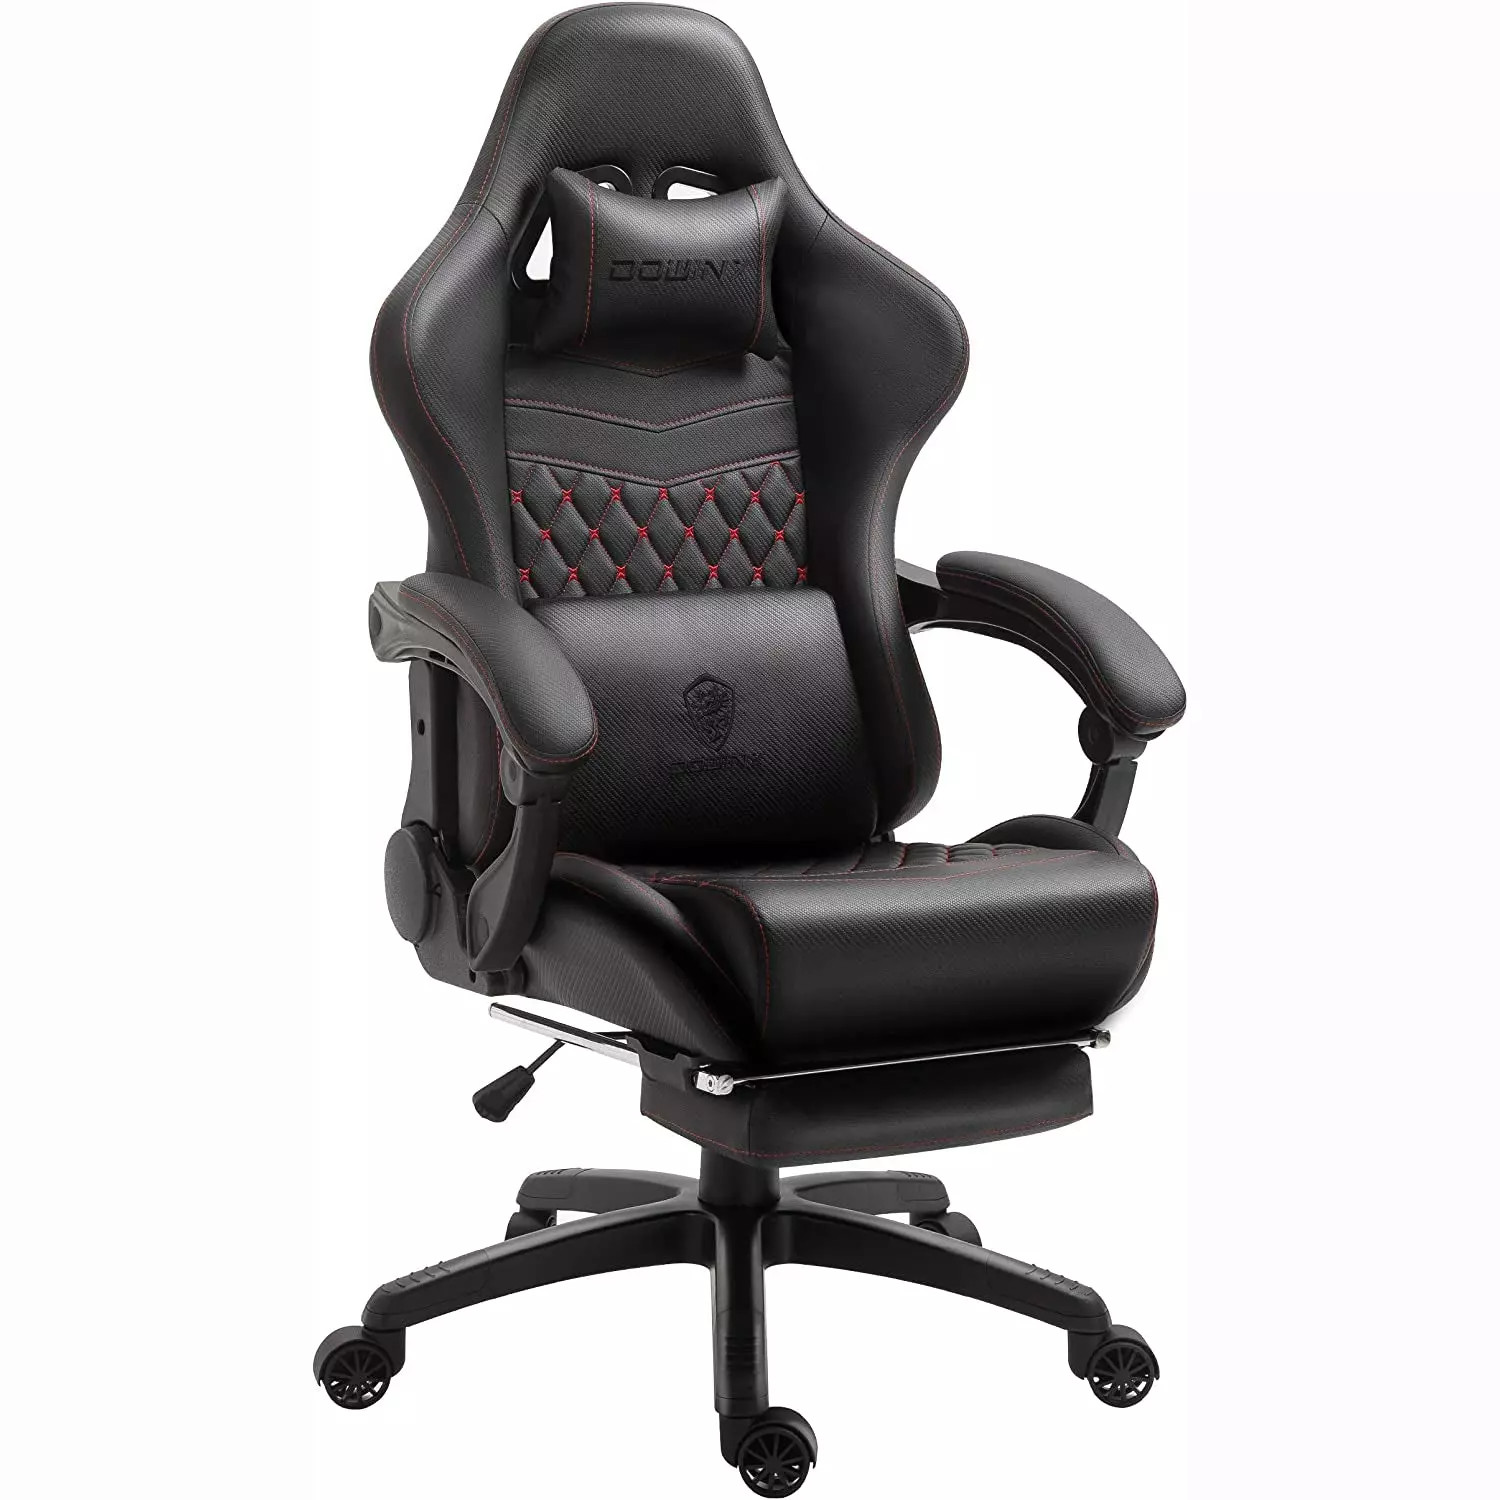 /dowinx-gaming-chair